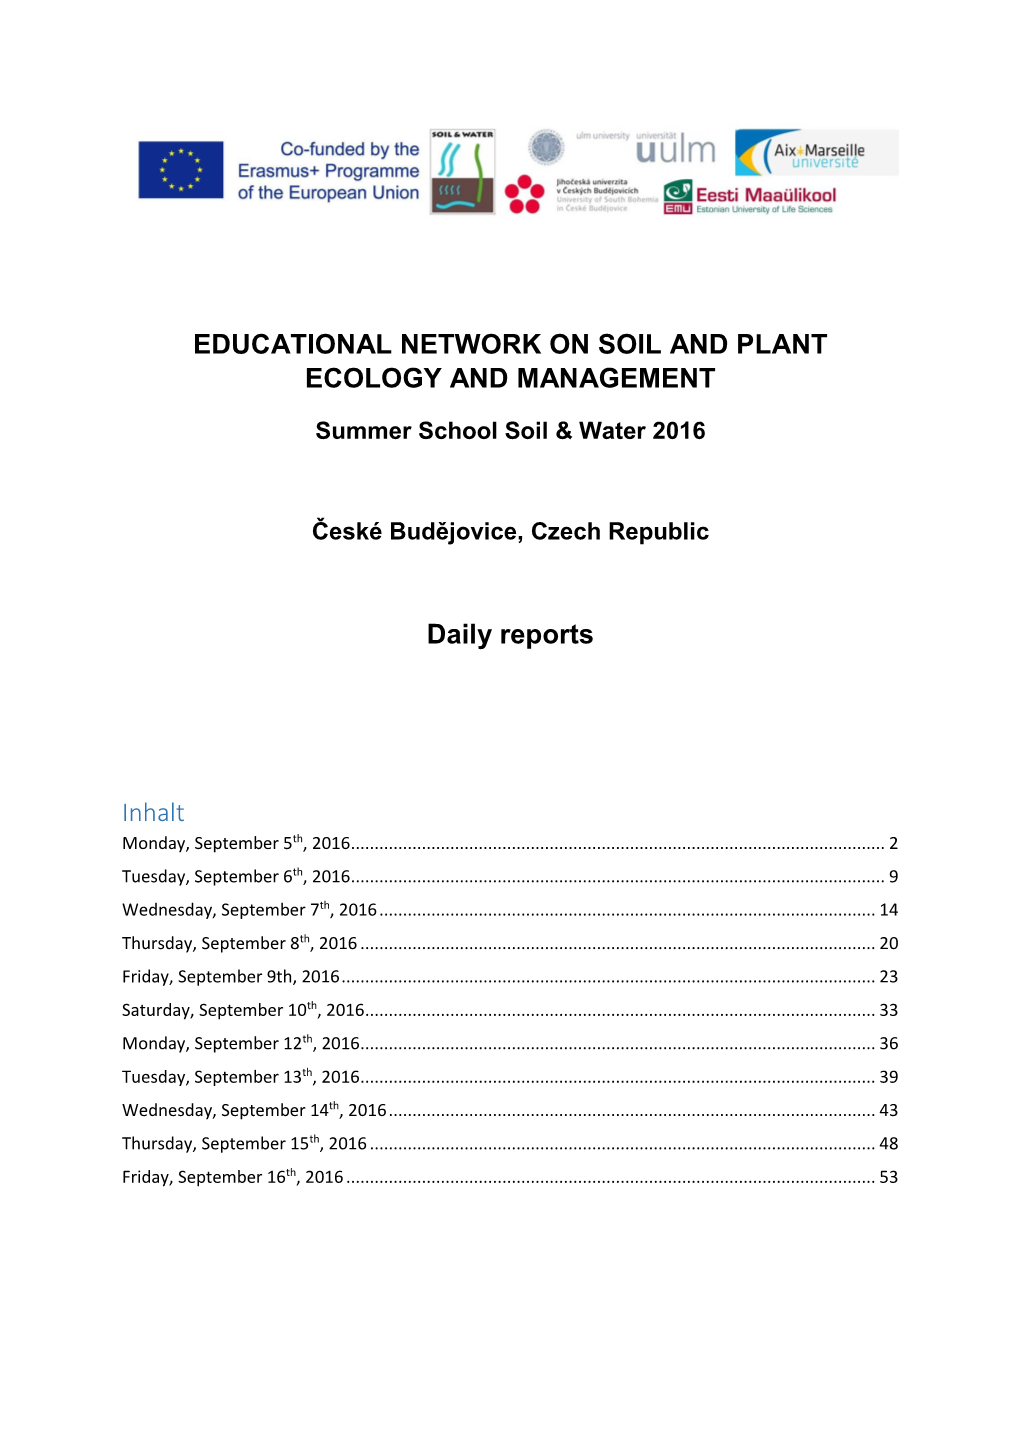 EDUCATIONAL NETWORK on SOIL and PLANT ECOLOGY and MANAGEMENT Daily Reports Inhalt